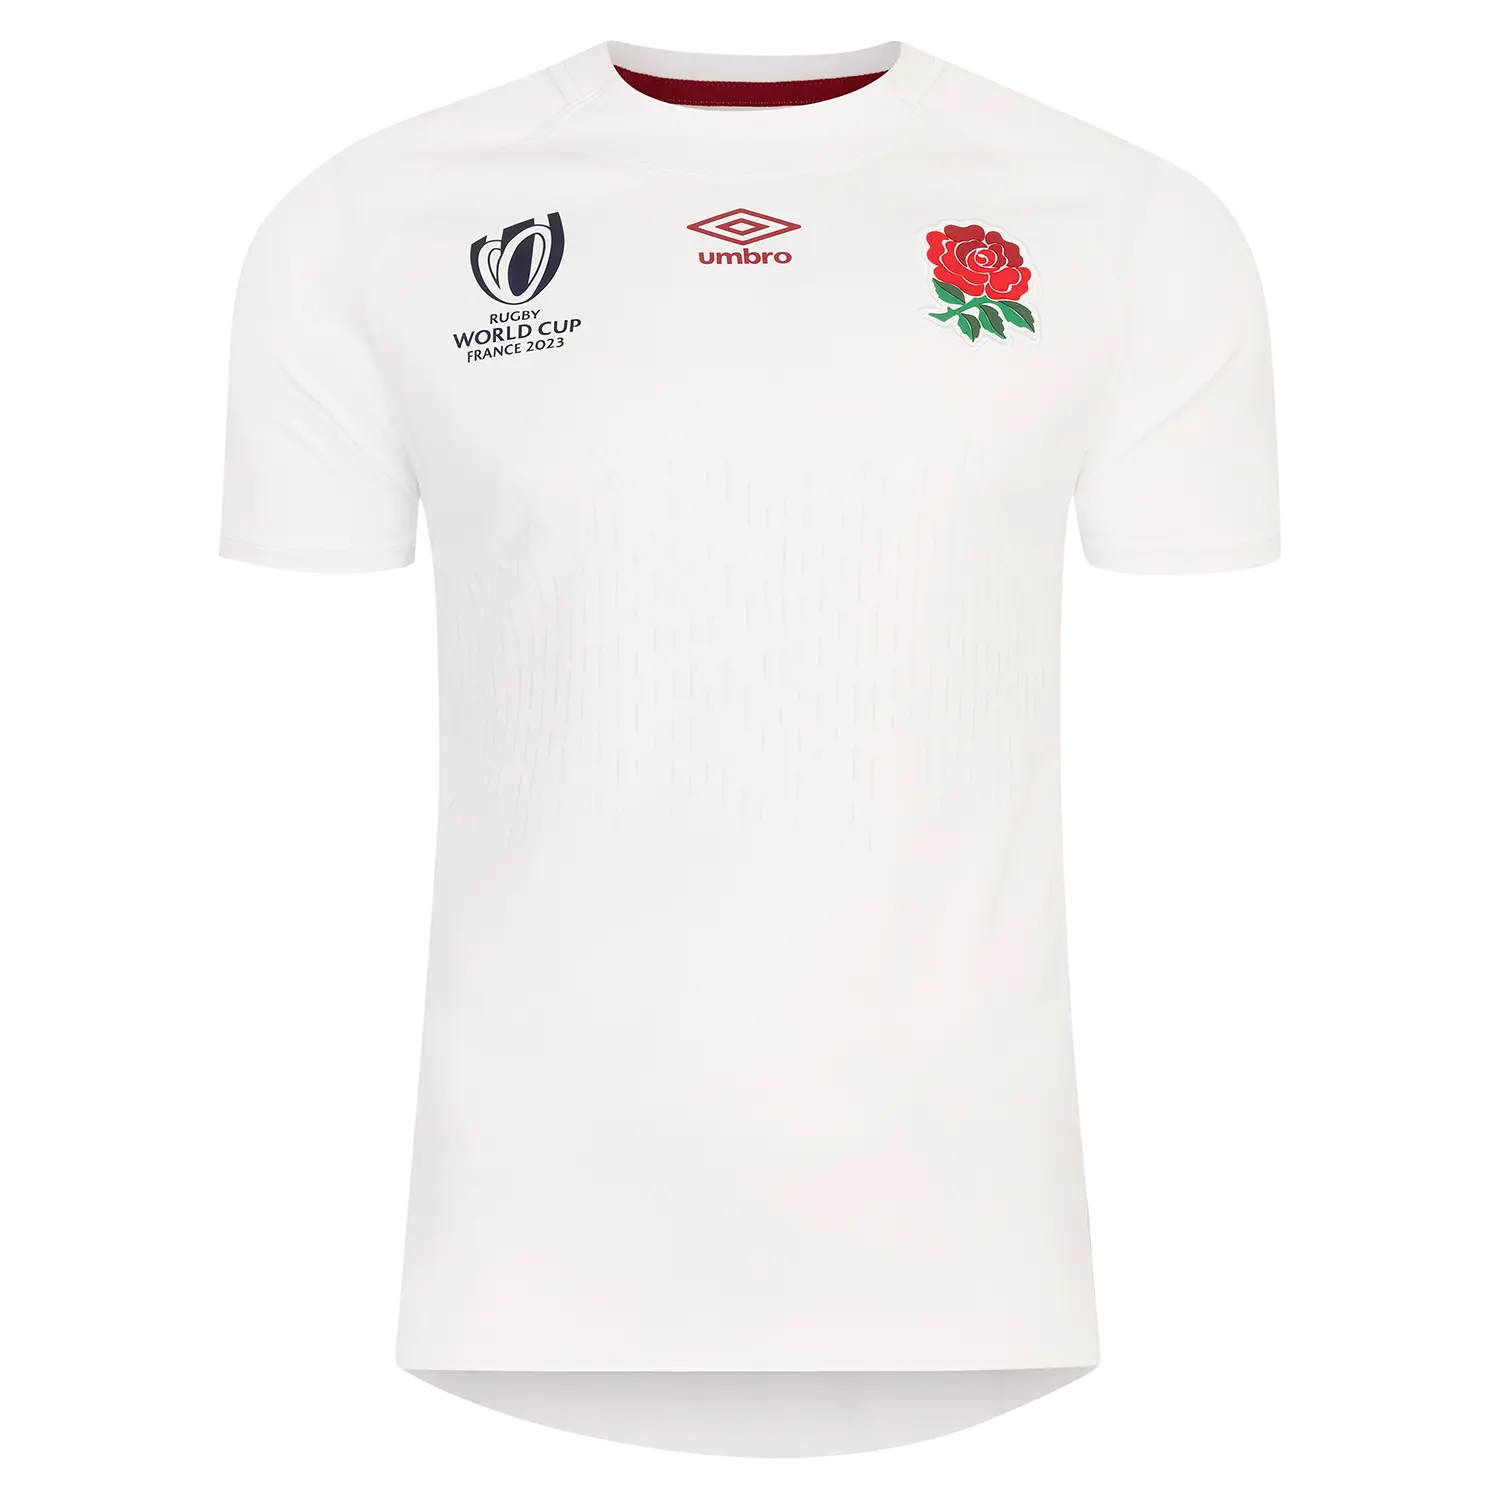 Umbro England Rugby World Cup Home Replica Jersey Short-Sleeved Junior Top